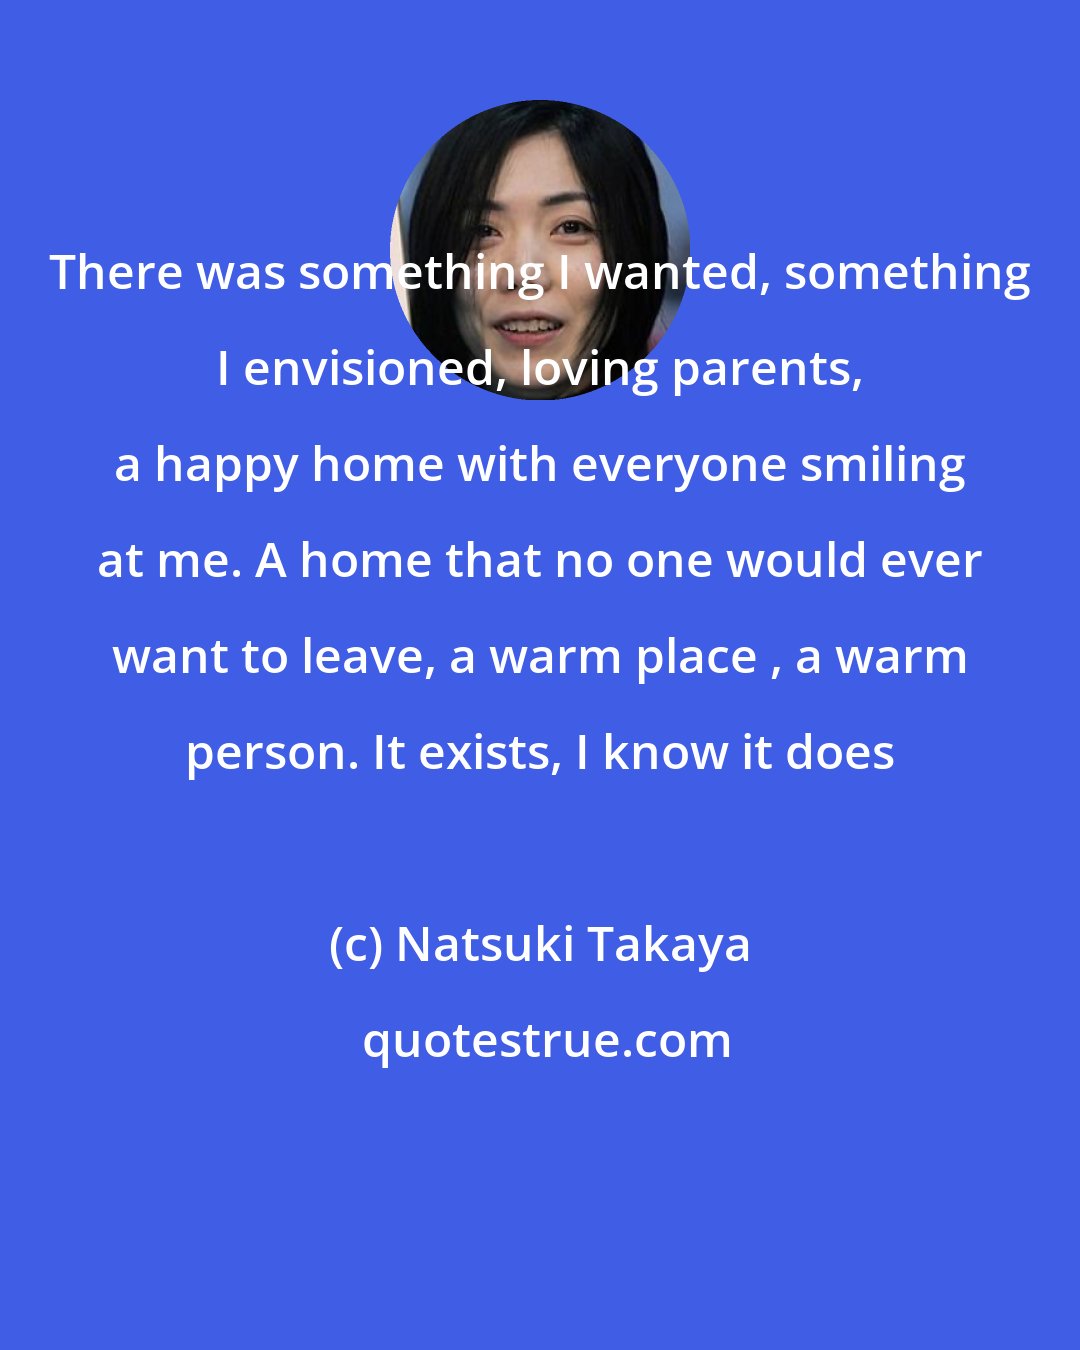 Natsuki Takaya: There was something I wanted, something I envisioned, loving parents, a happy home with everyone smiling at me. A home that no one would ever want to leave, a warm place , a warm person. It exists, I know it does